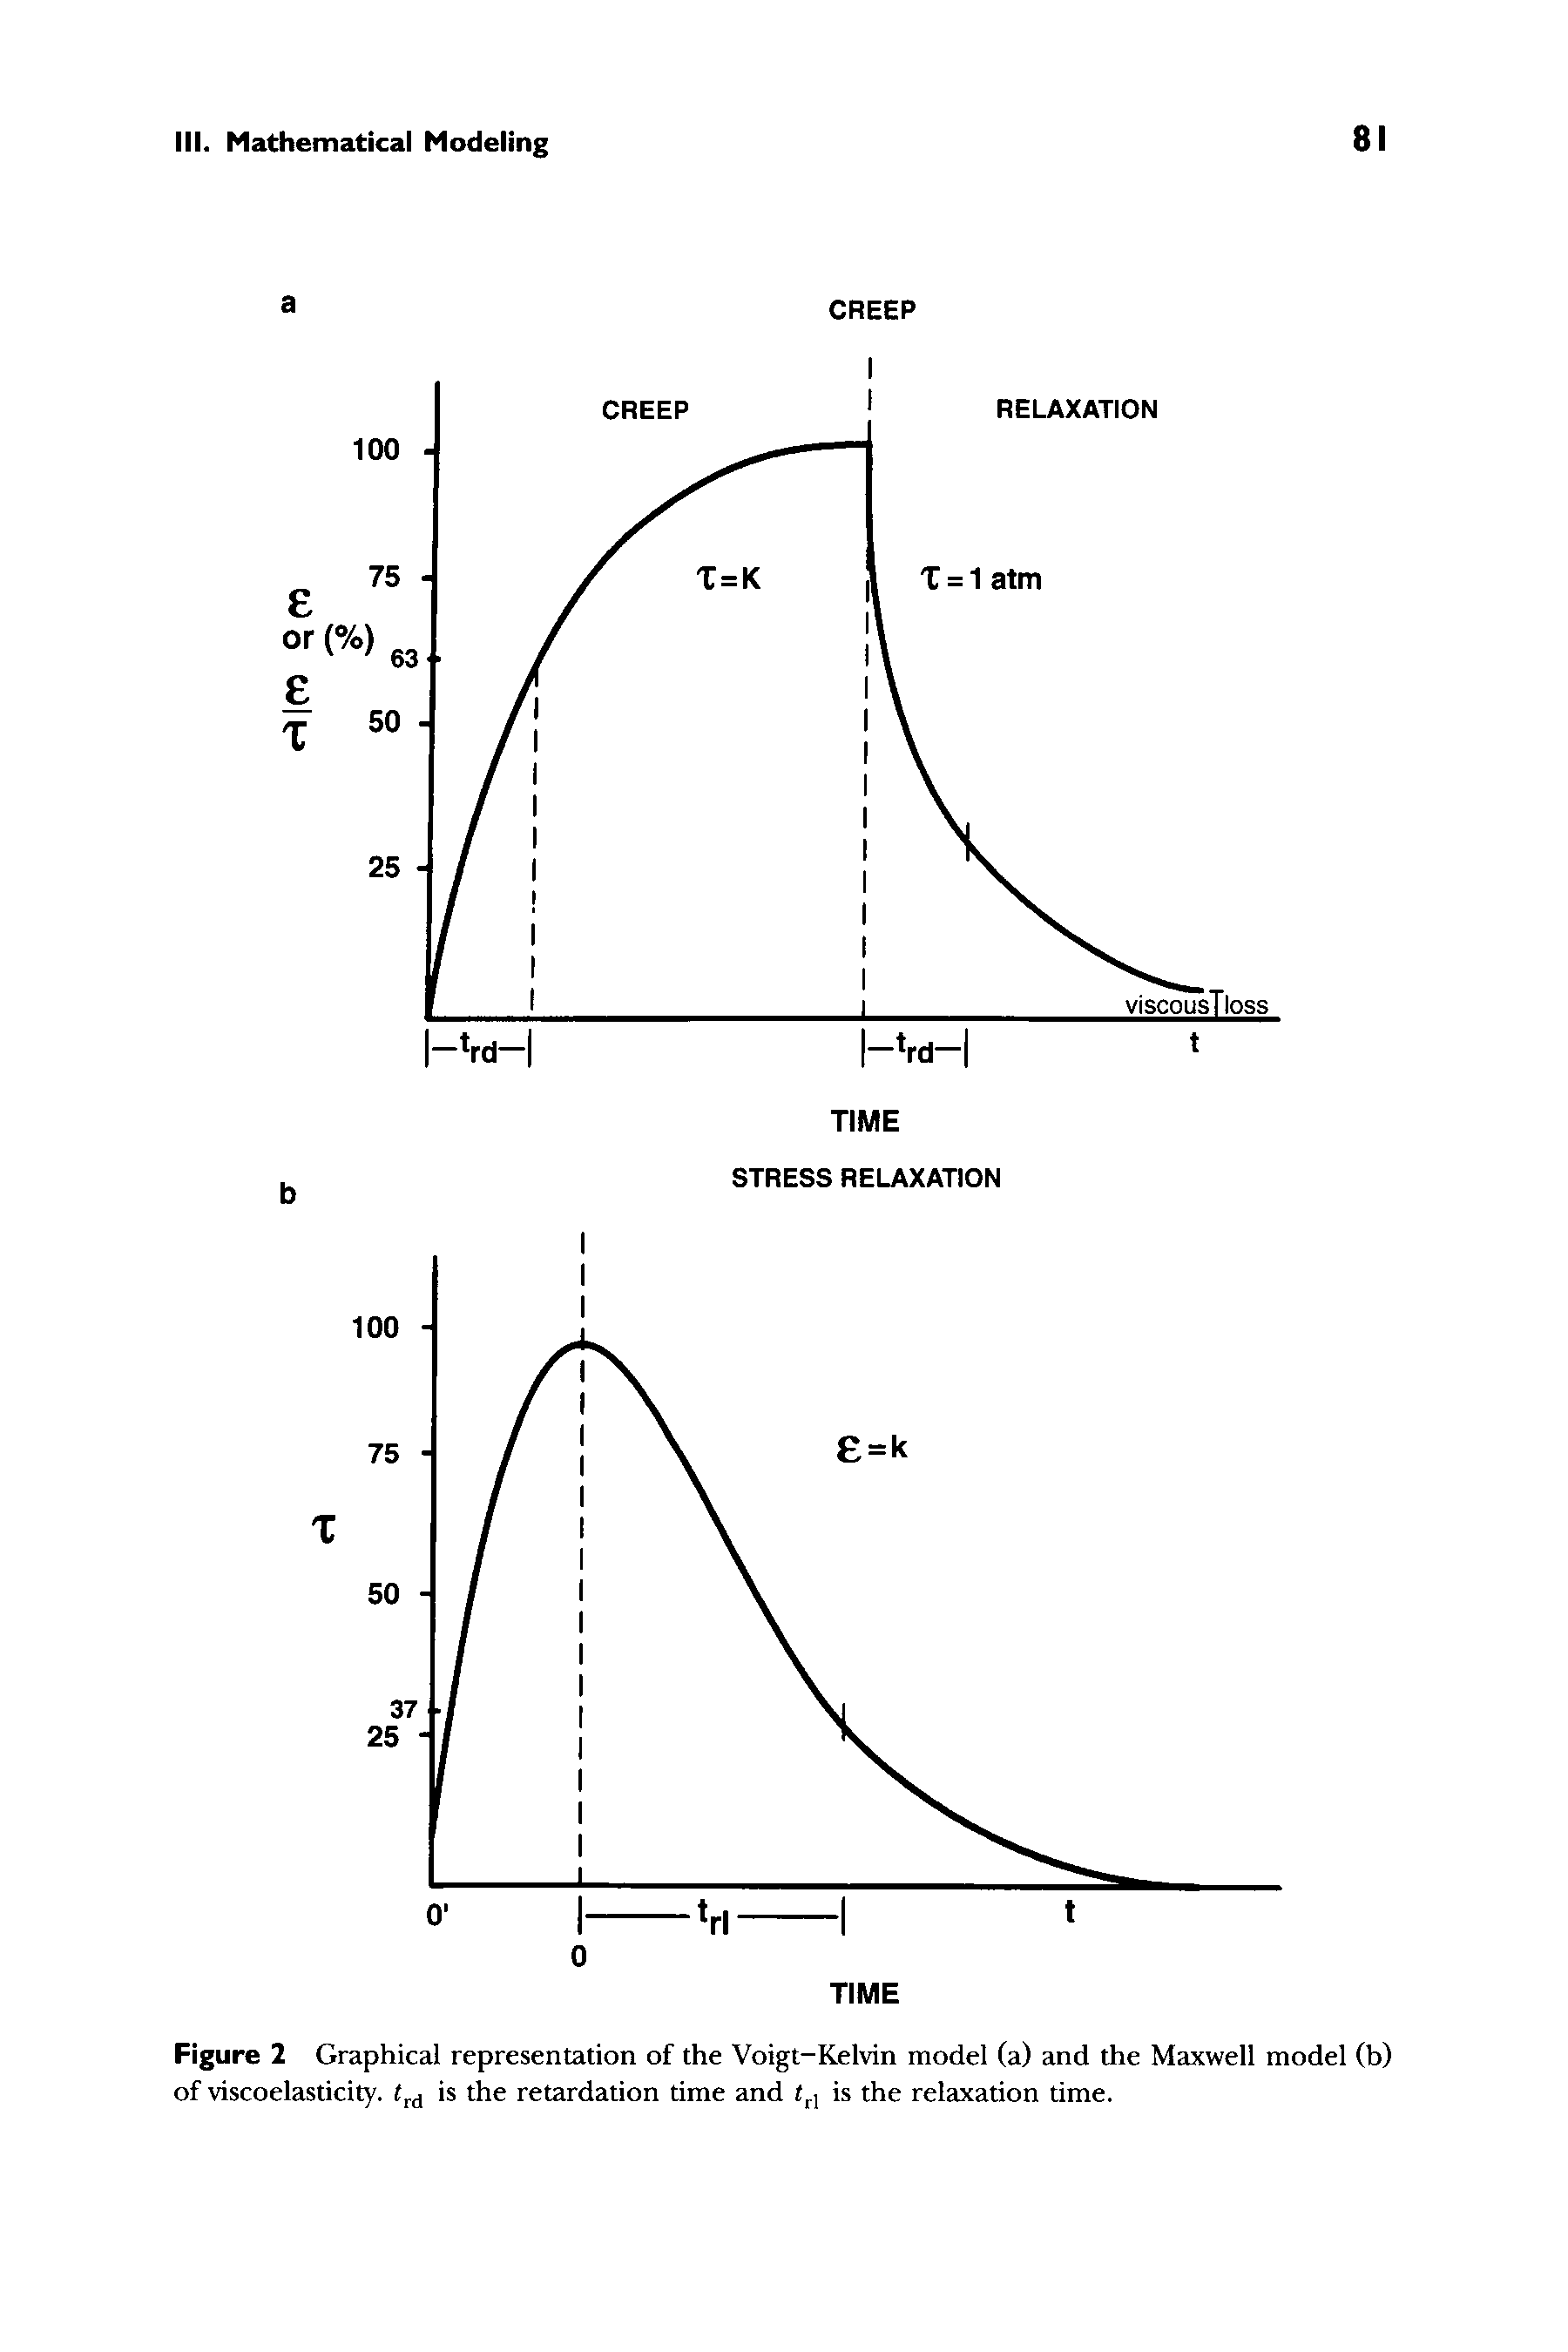 Figure 2 Graphical representation of the Voigt-Kelvin model (a) and the Maxwell model (b) of viscoelasticity. rd is the retardation time and <rl is the relaxation time.